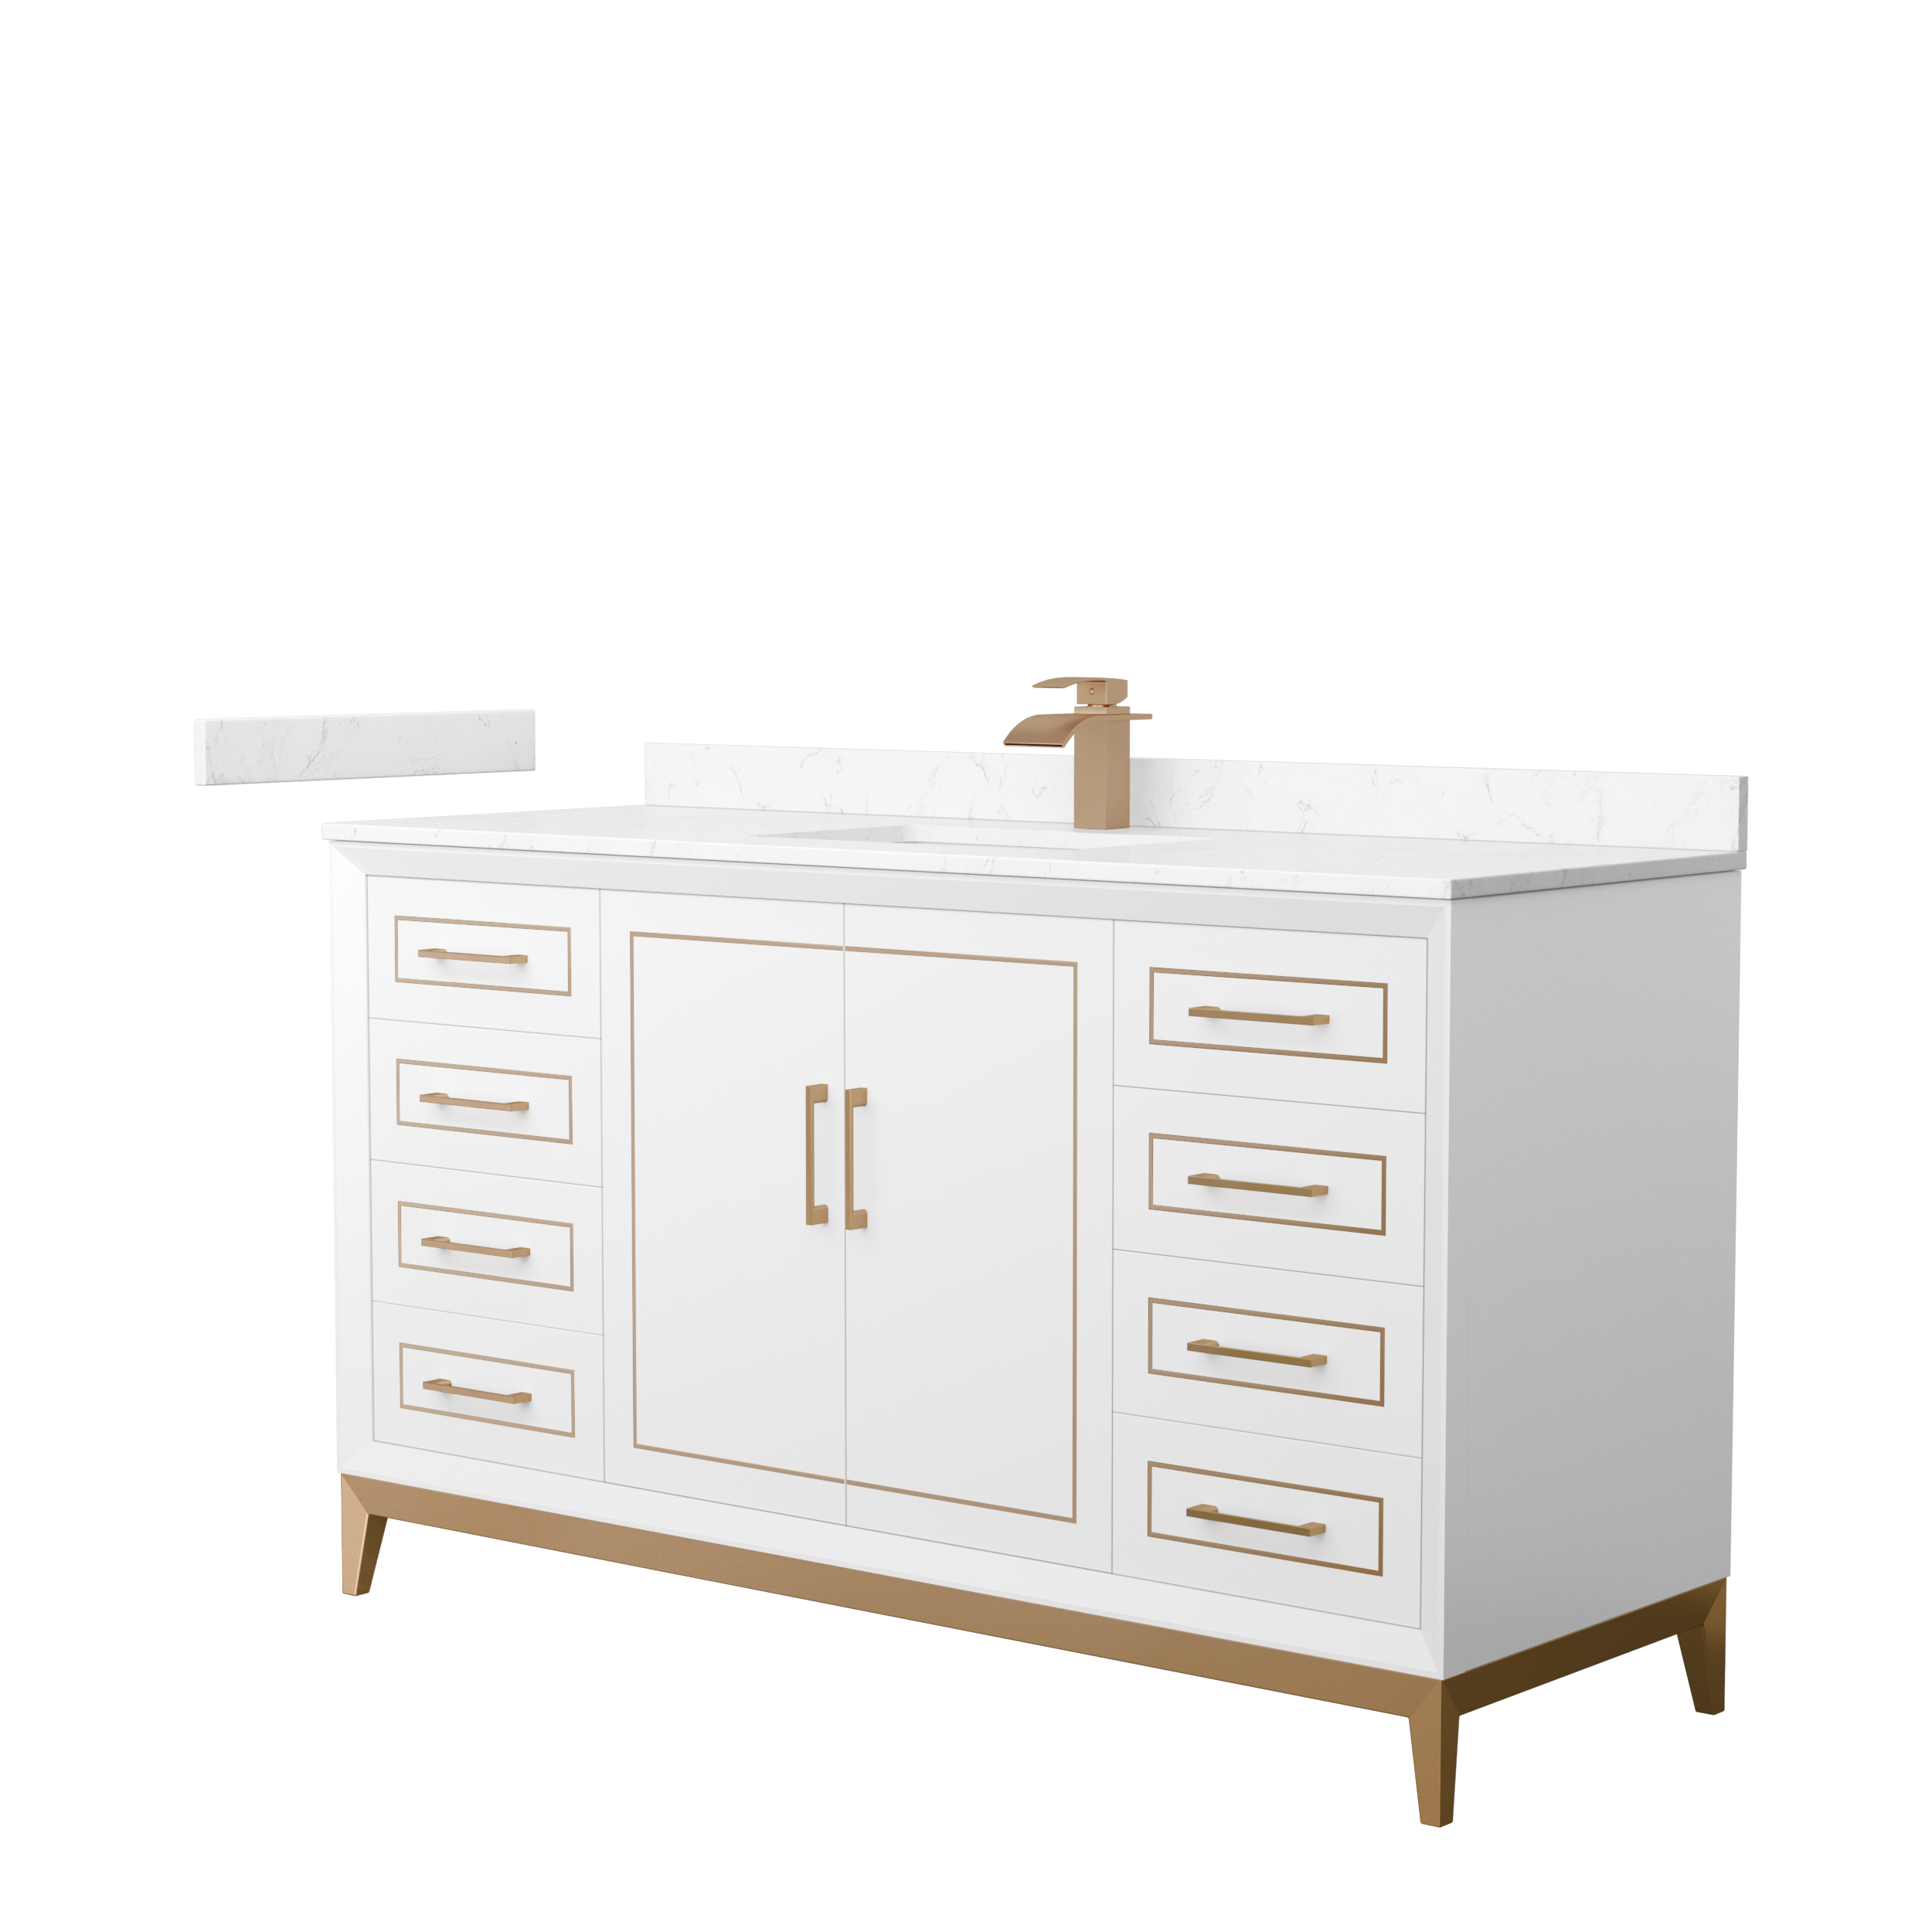 marlena 60" single vanity with optional cultured marble counter - white